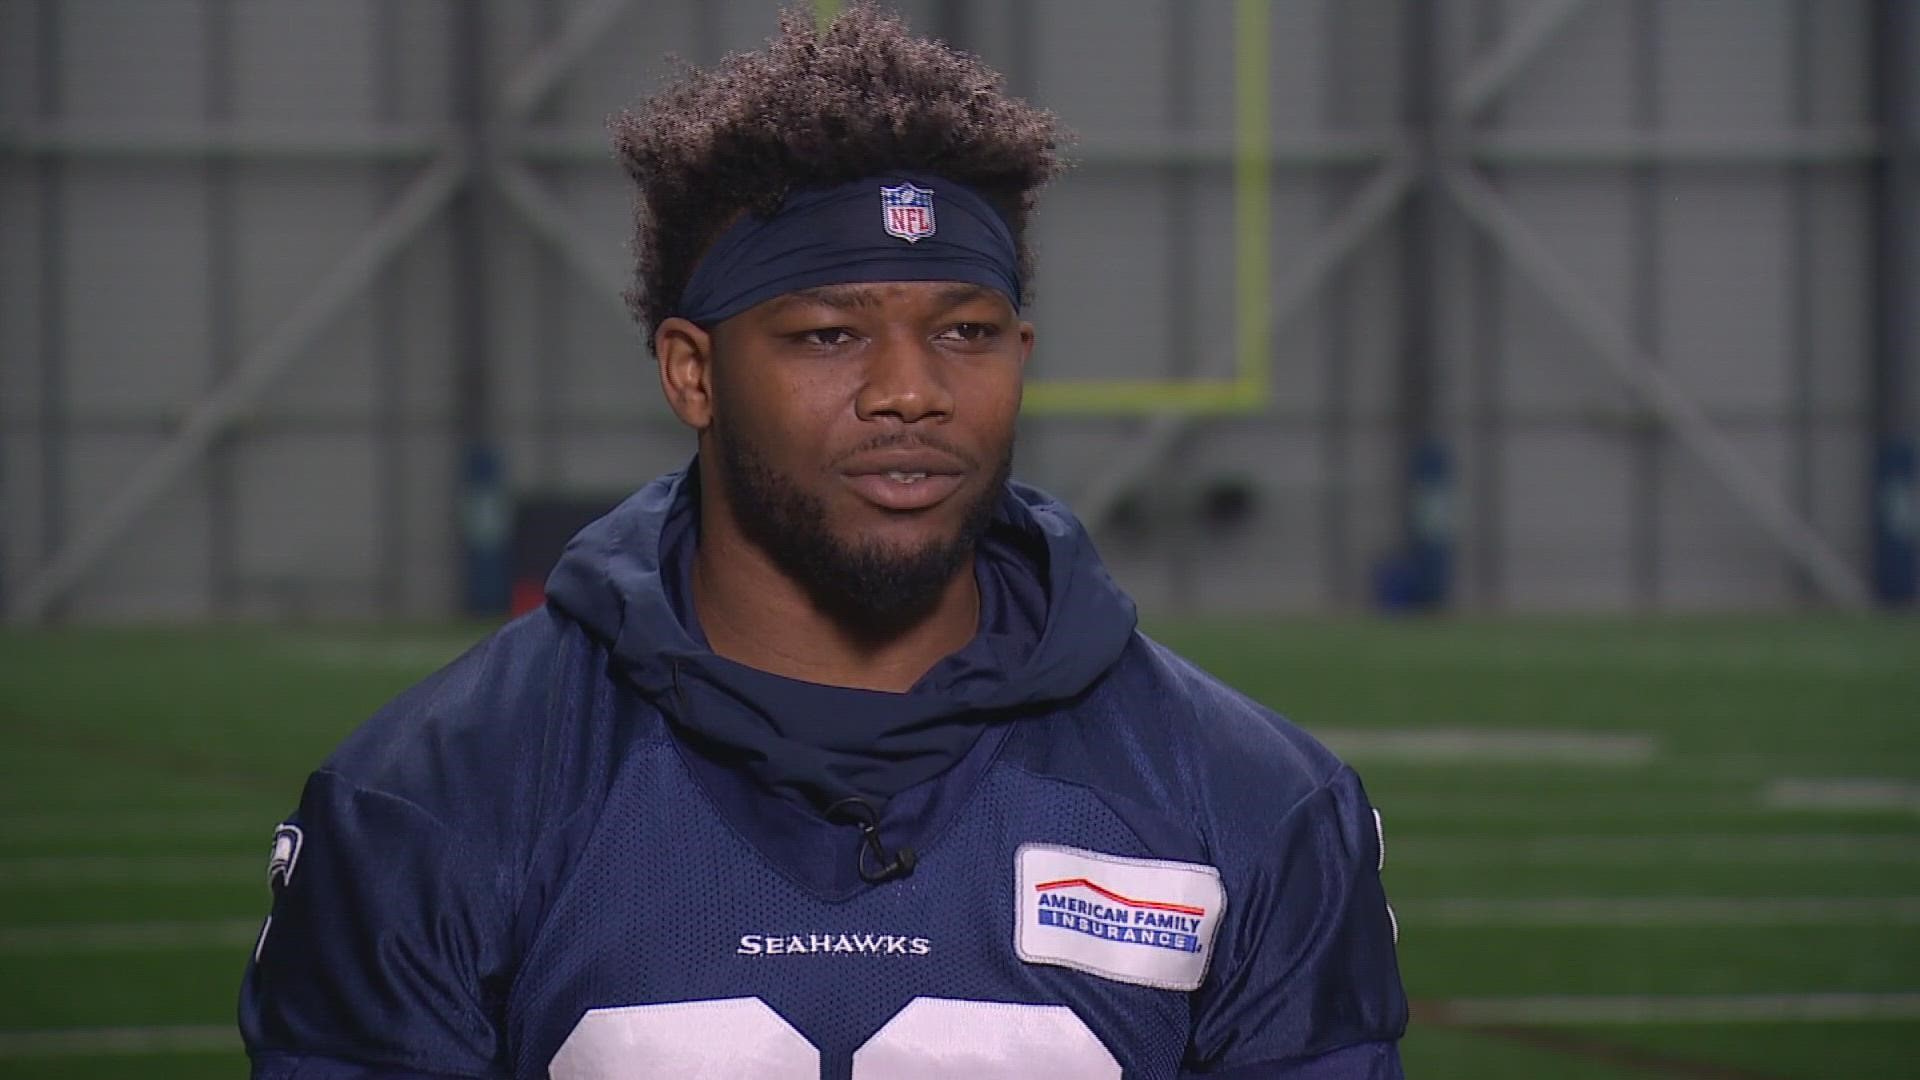 Seahawks running back Rashaad Penny sits down with Paul Silvi to talk the offseason, battling injuries, and his work with the 2 Cents Foundation.